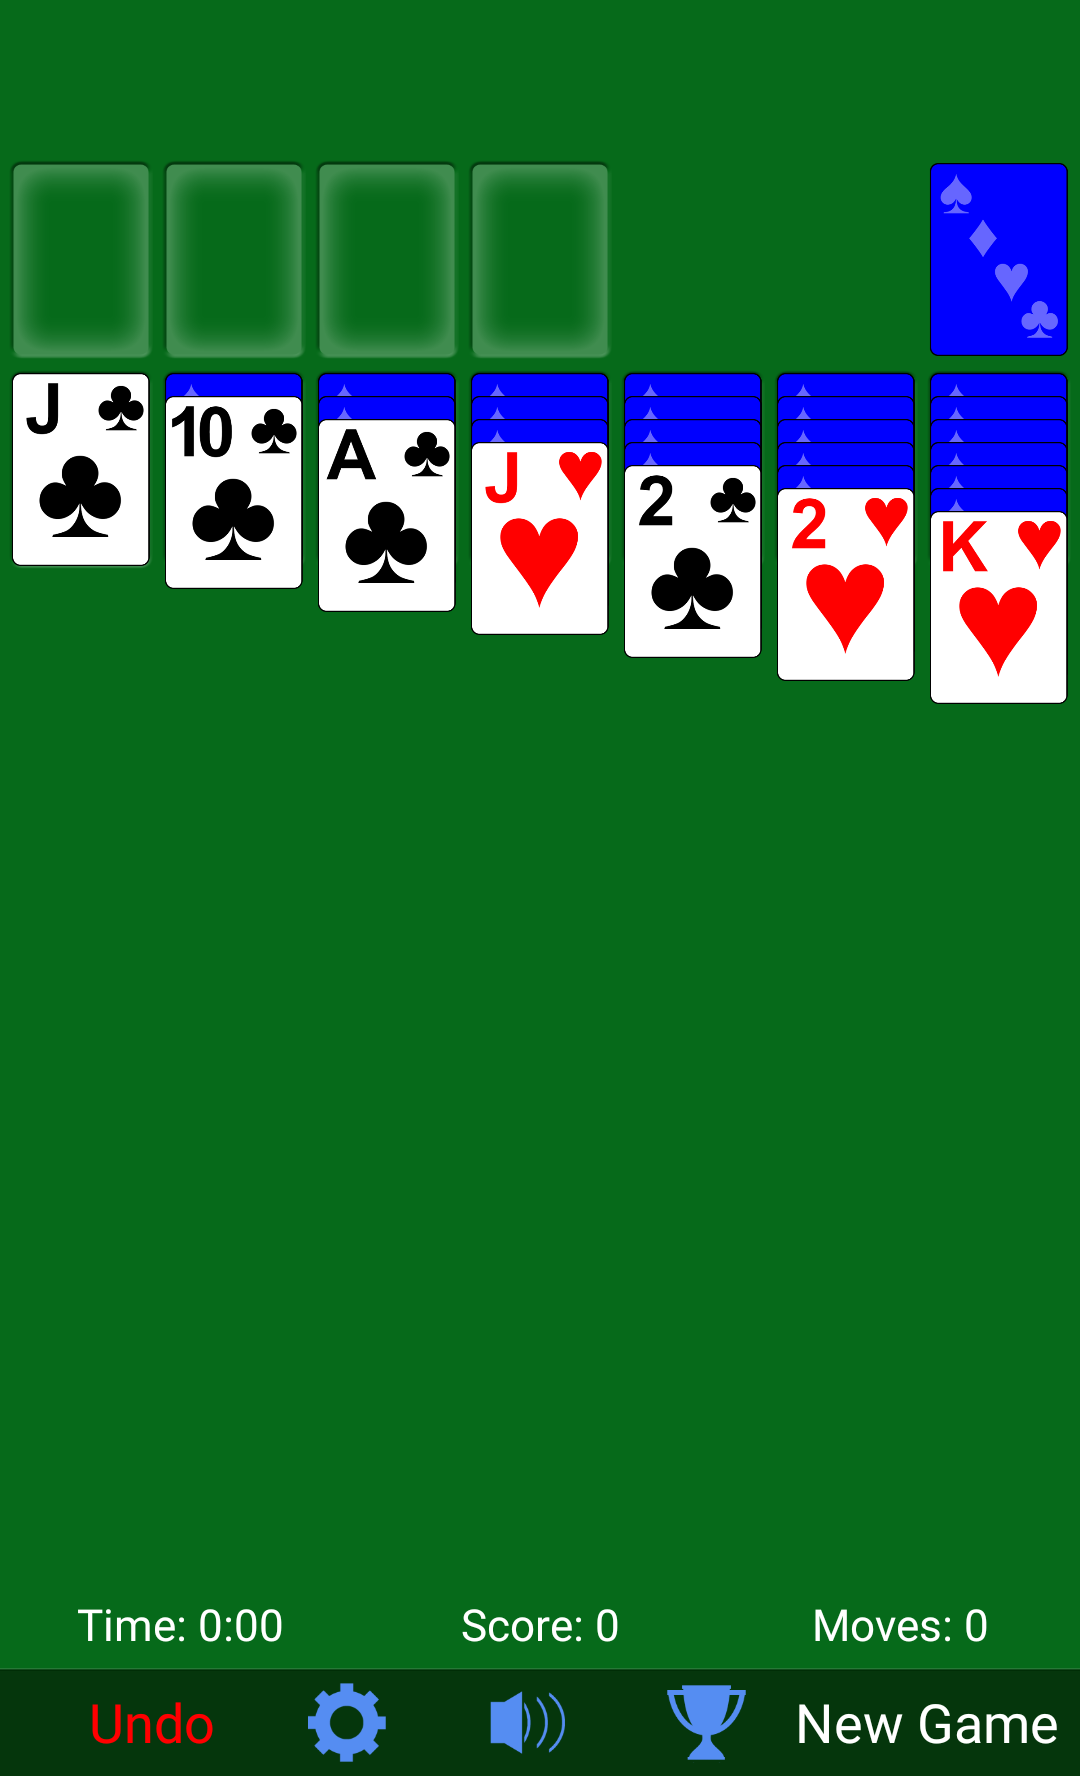 Android application Solitaire + Card Game by Zynga screenshort